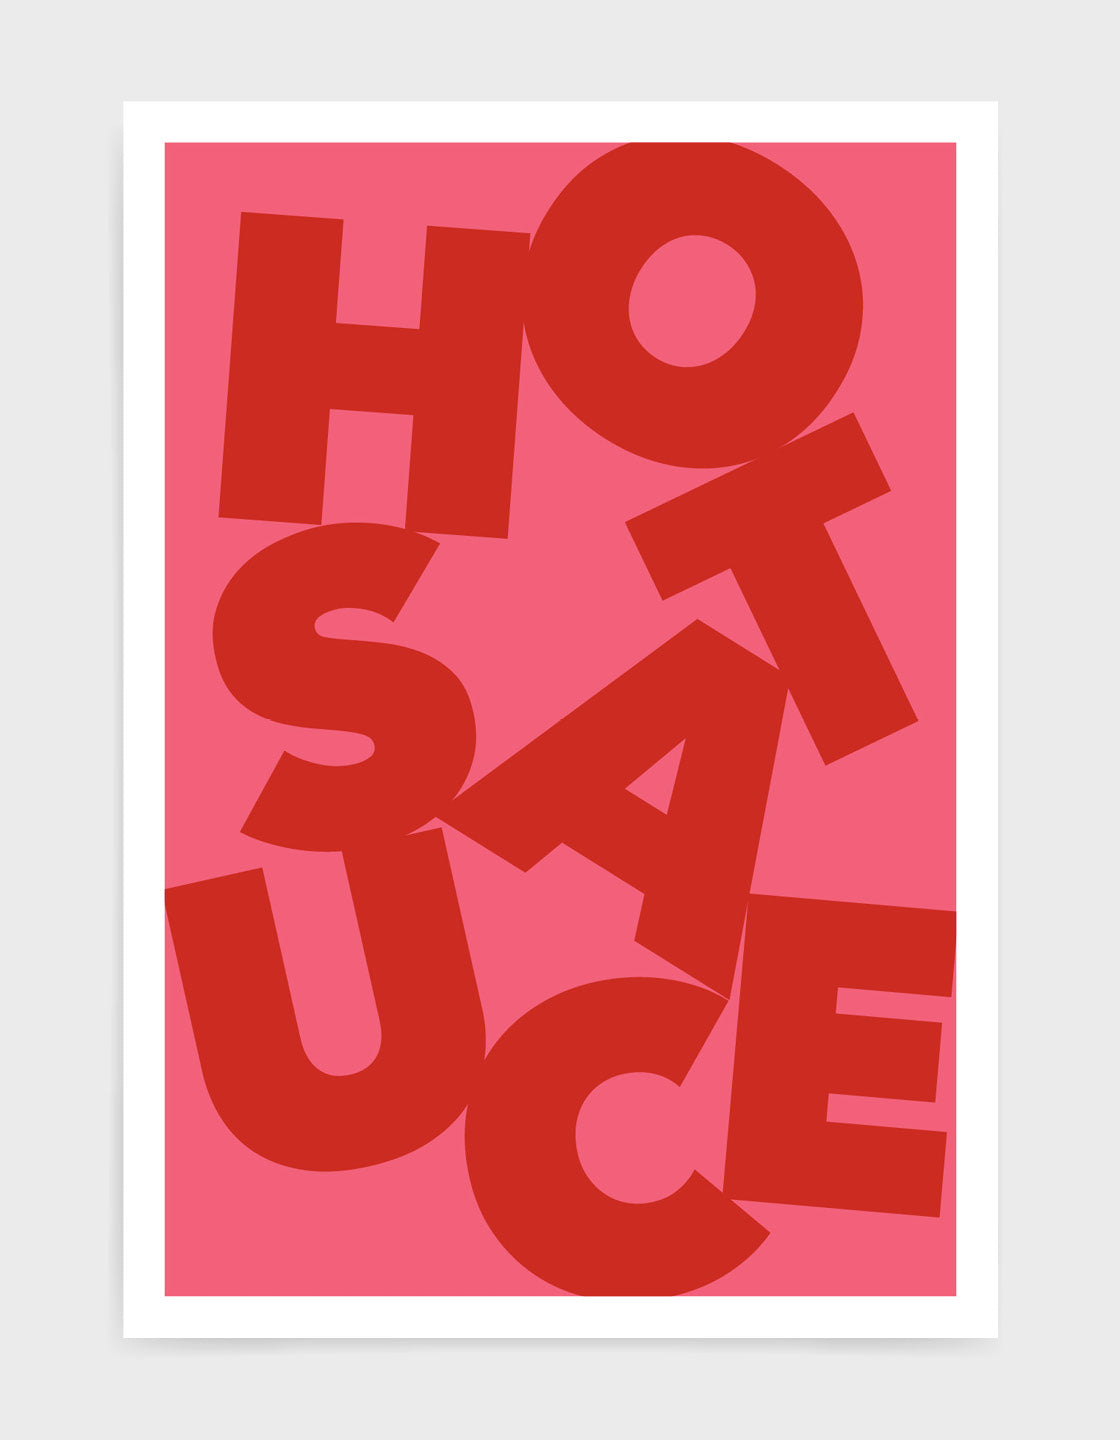 typography art print of the word Hot Sauce in red text against a pink background